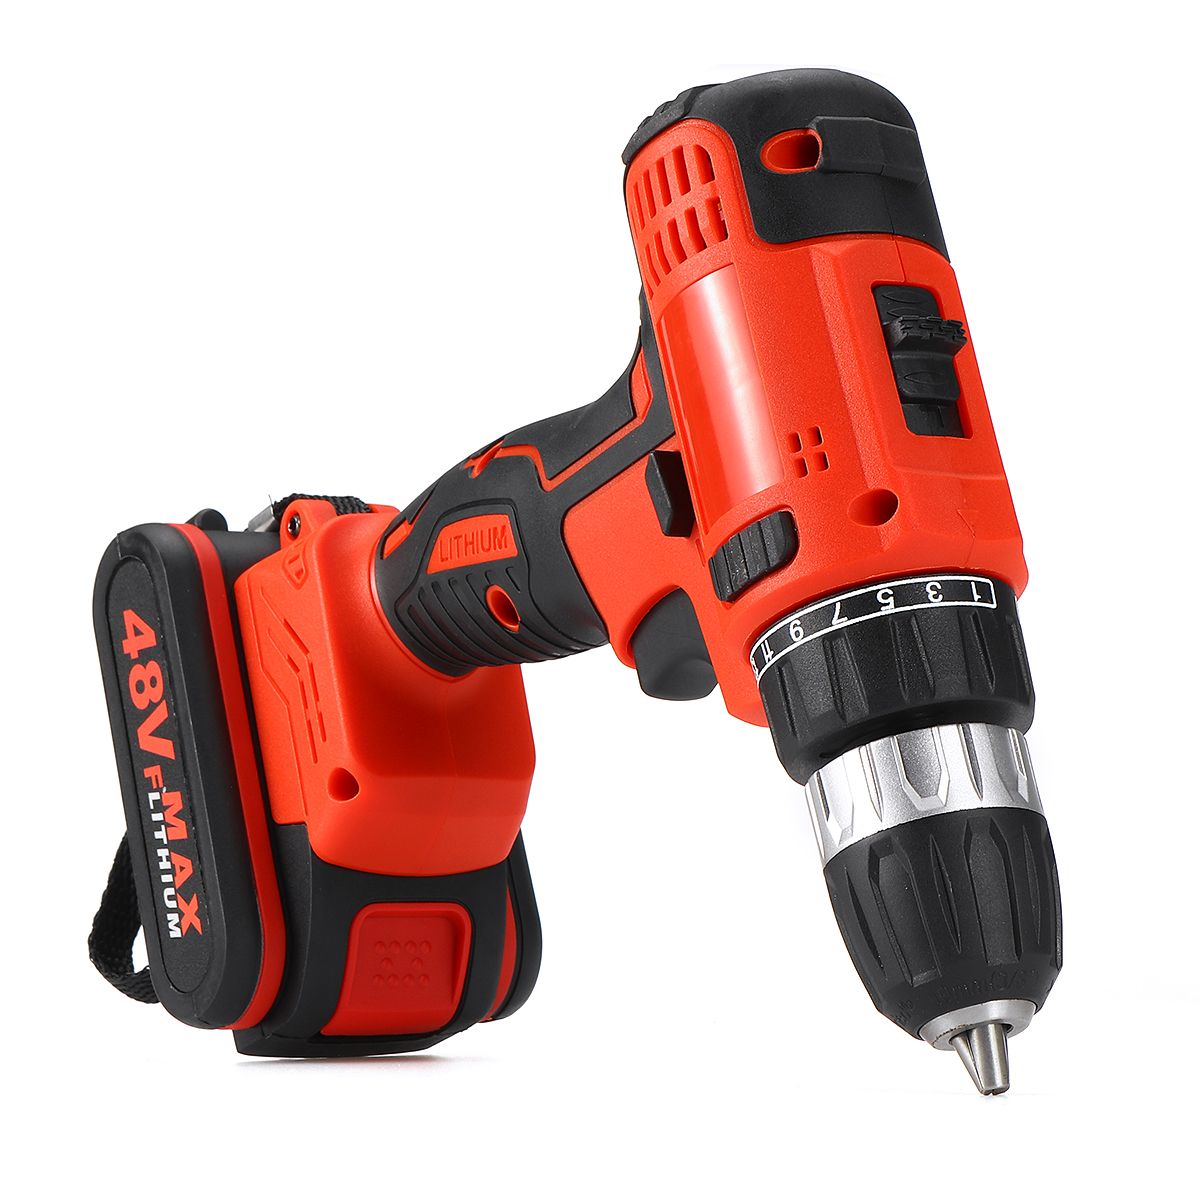 48VF-2000mAh-Cordless-Rechargeable-Brushless-Electric-Drill-W-1or-2-Battery-1572479